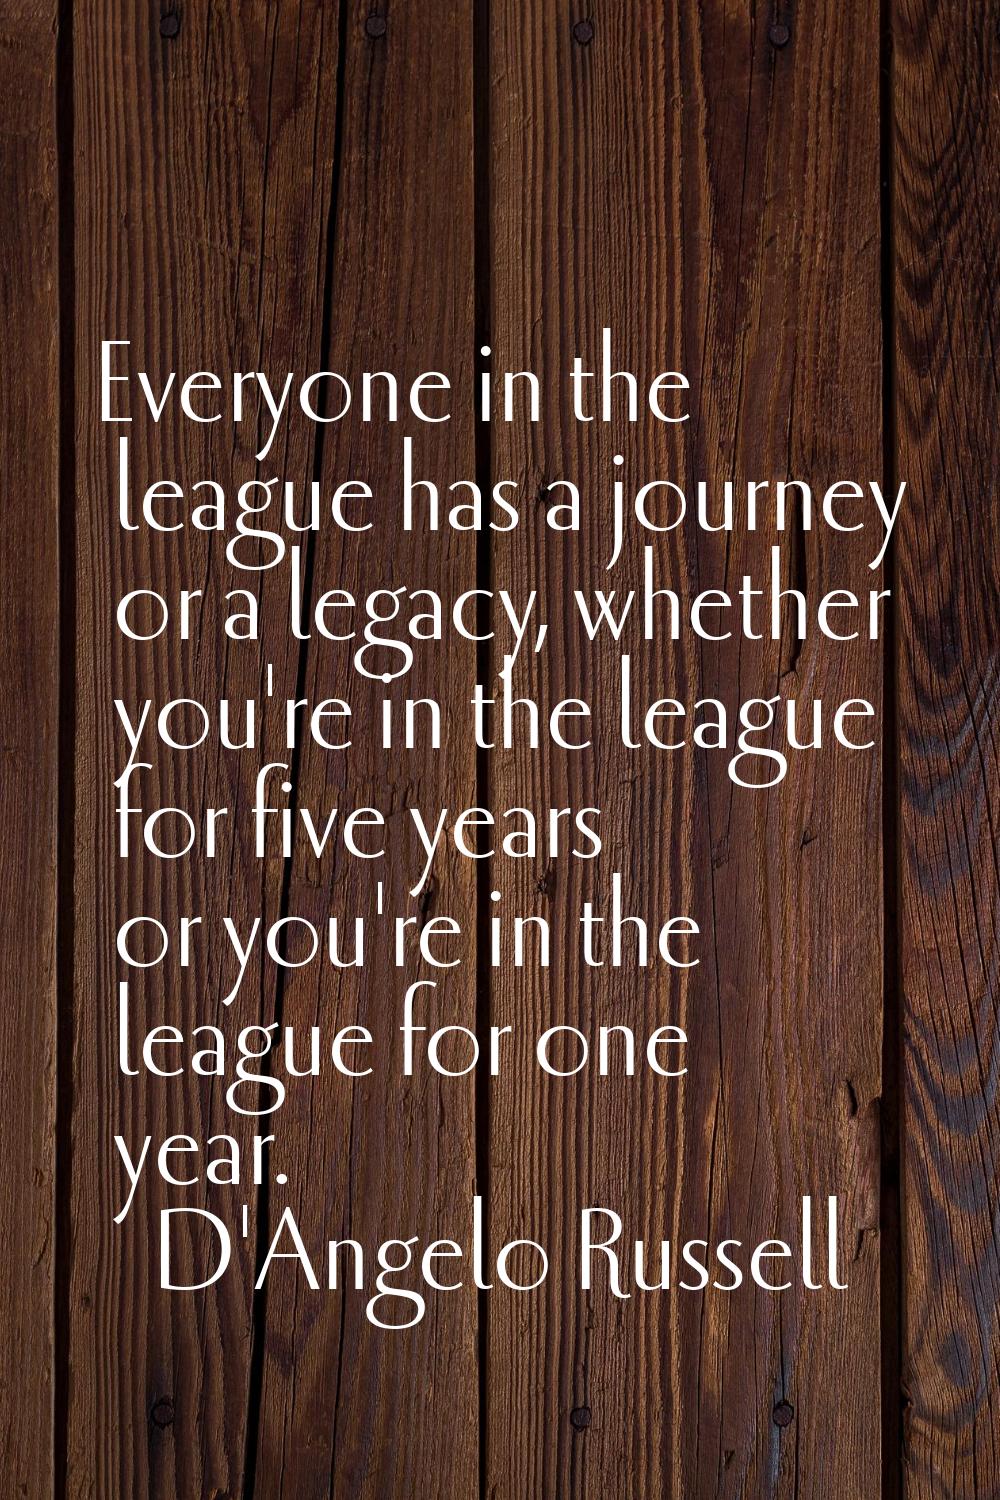 Everyone in the league has a journey or a legacy, whether you're in the league for five years or yo